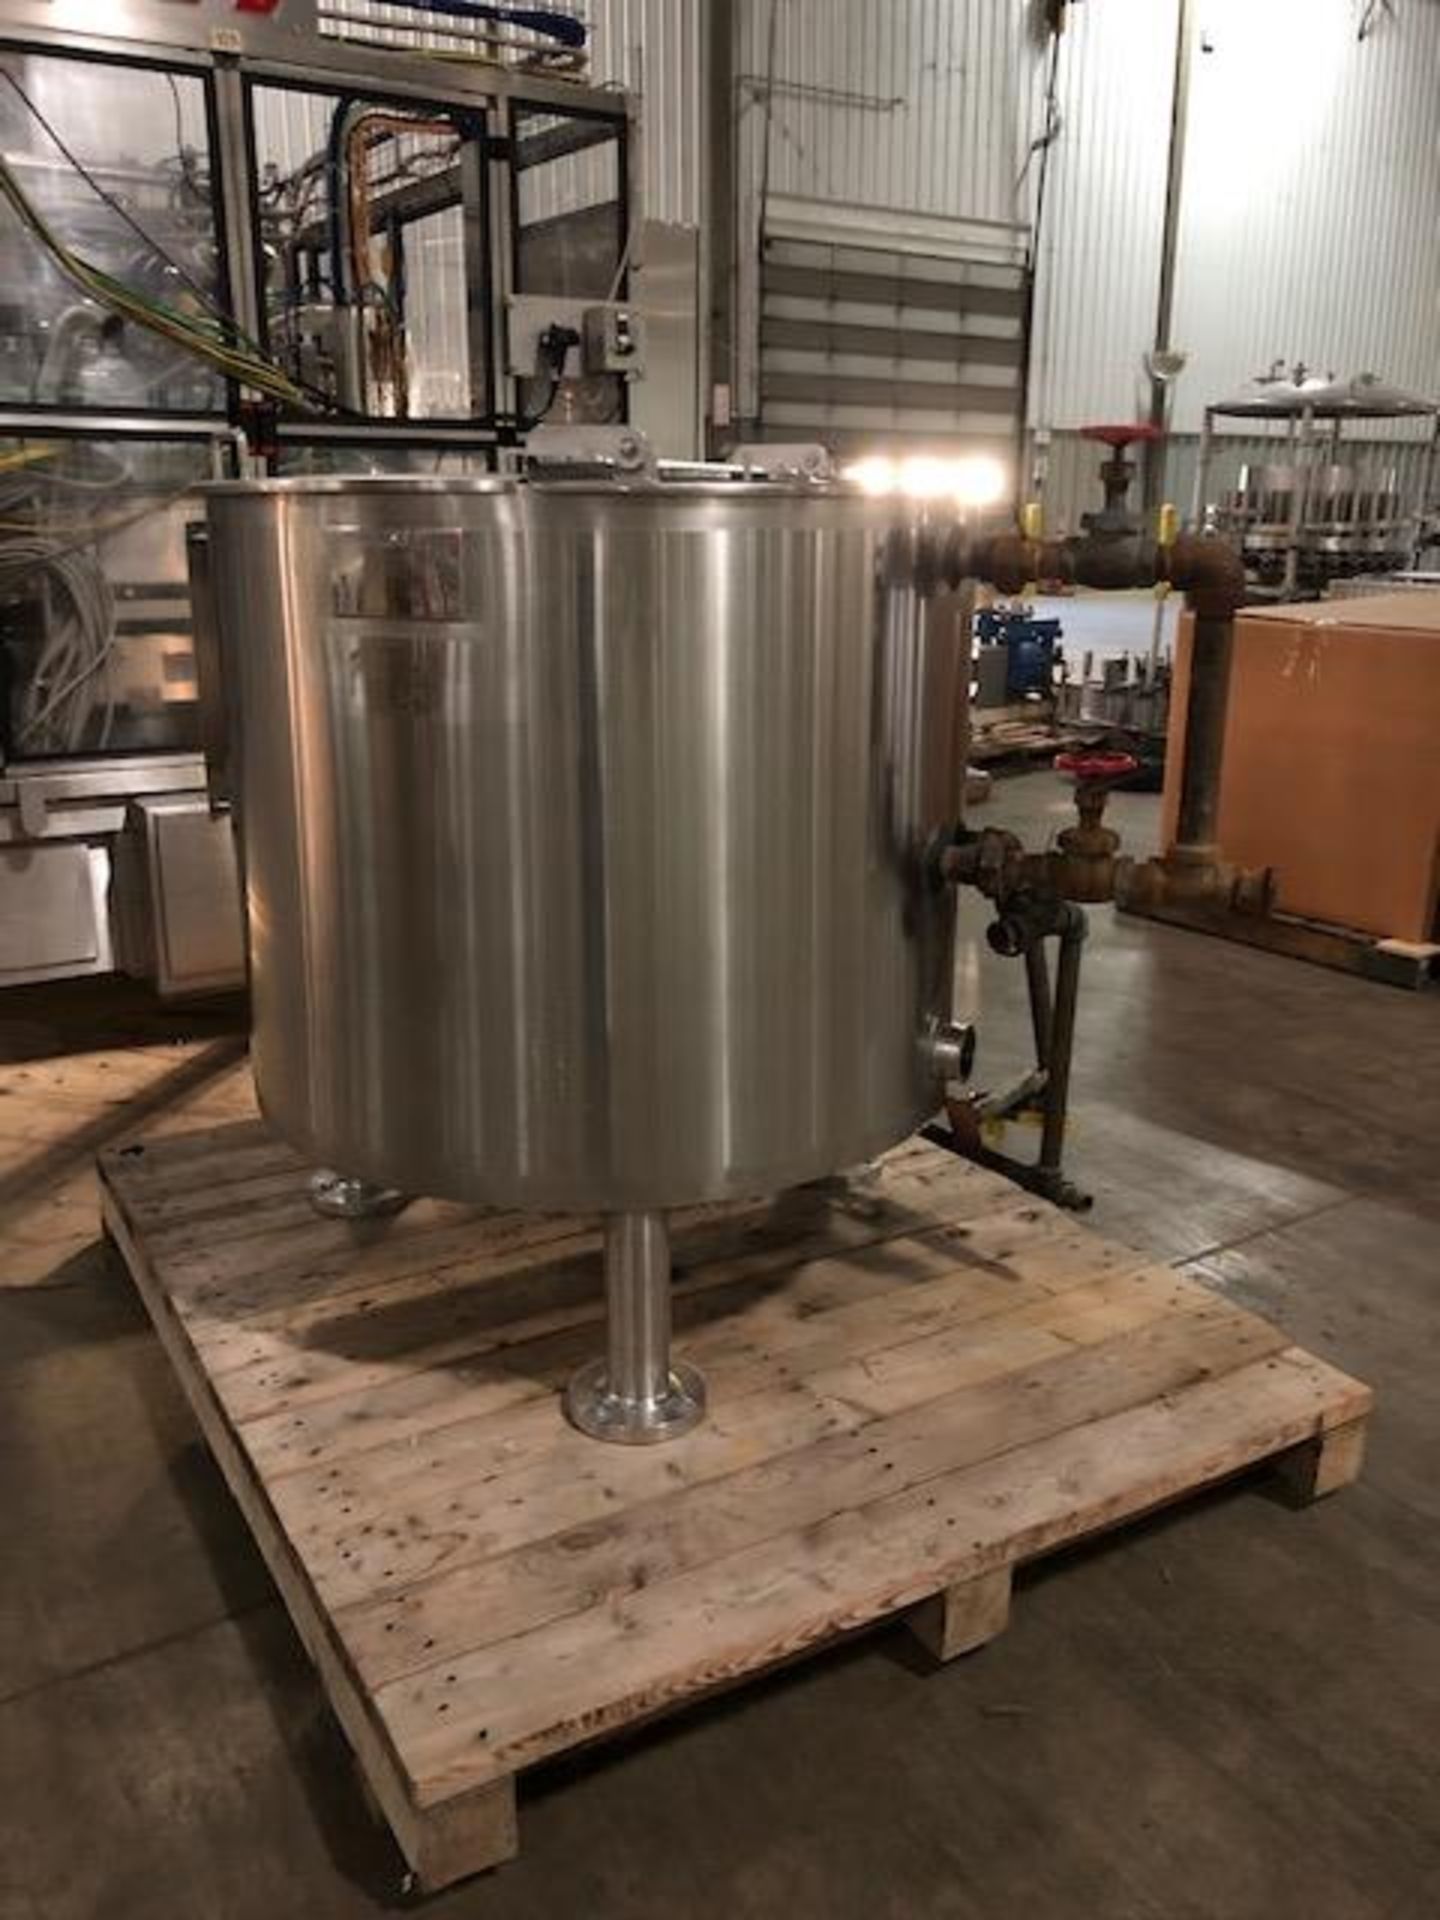 (Located in Mendota, IL) Lee Industries 150 Gallon Steam Jacketed Tank